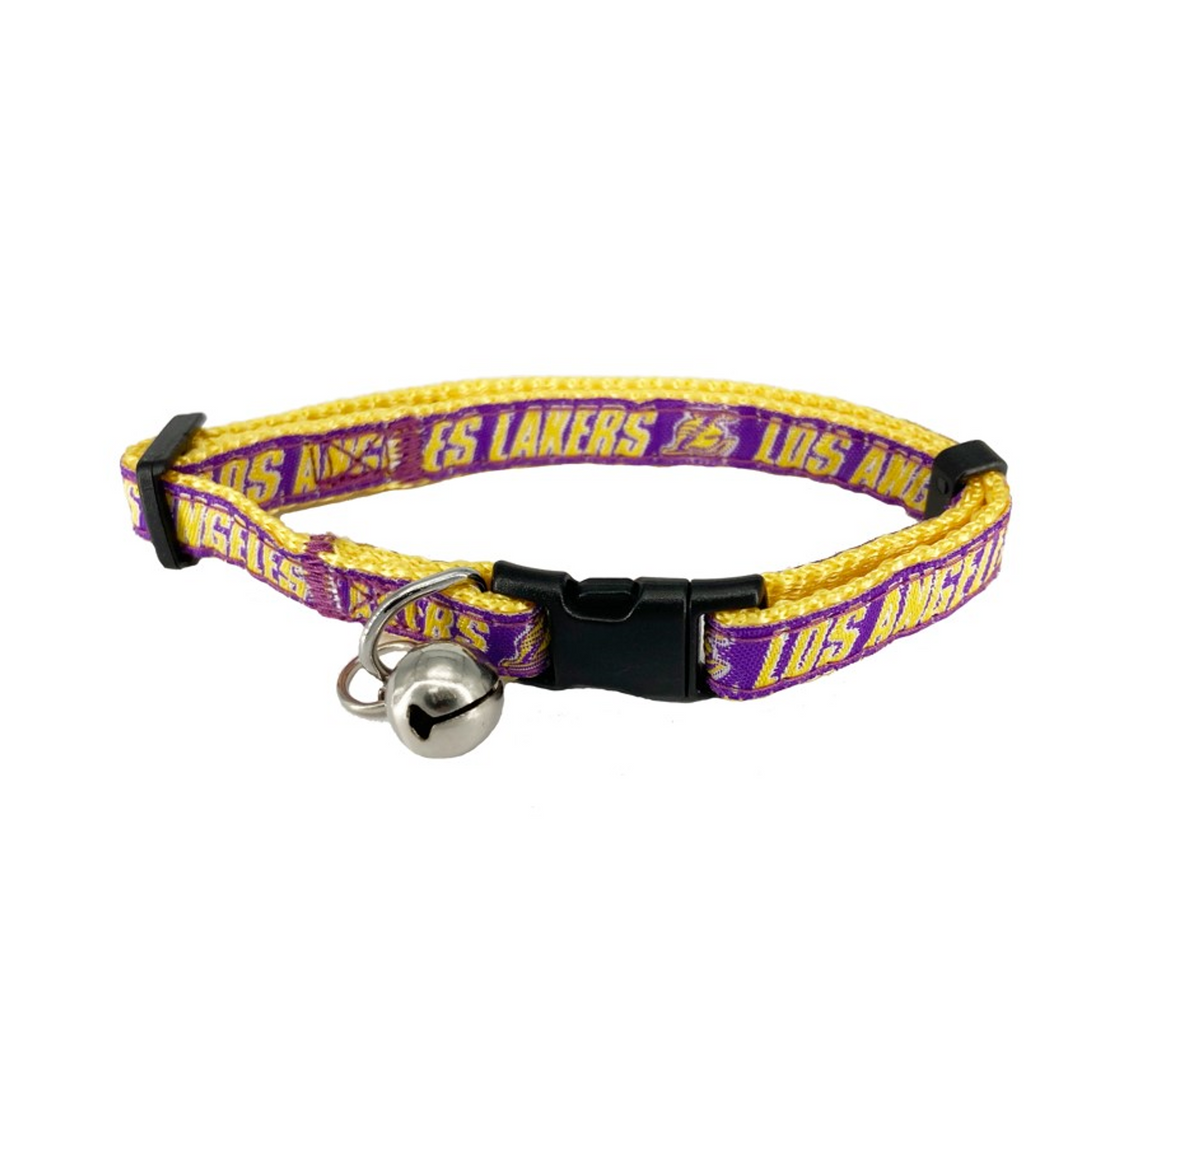 Los Angeles Lakers Cat Collar - 3 Red Rovers